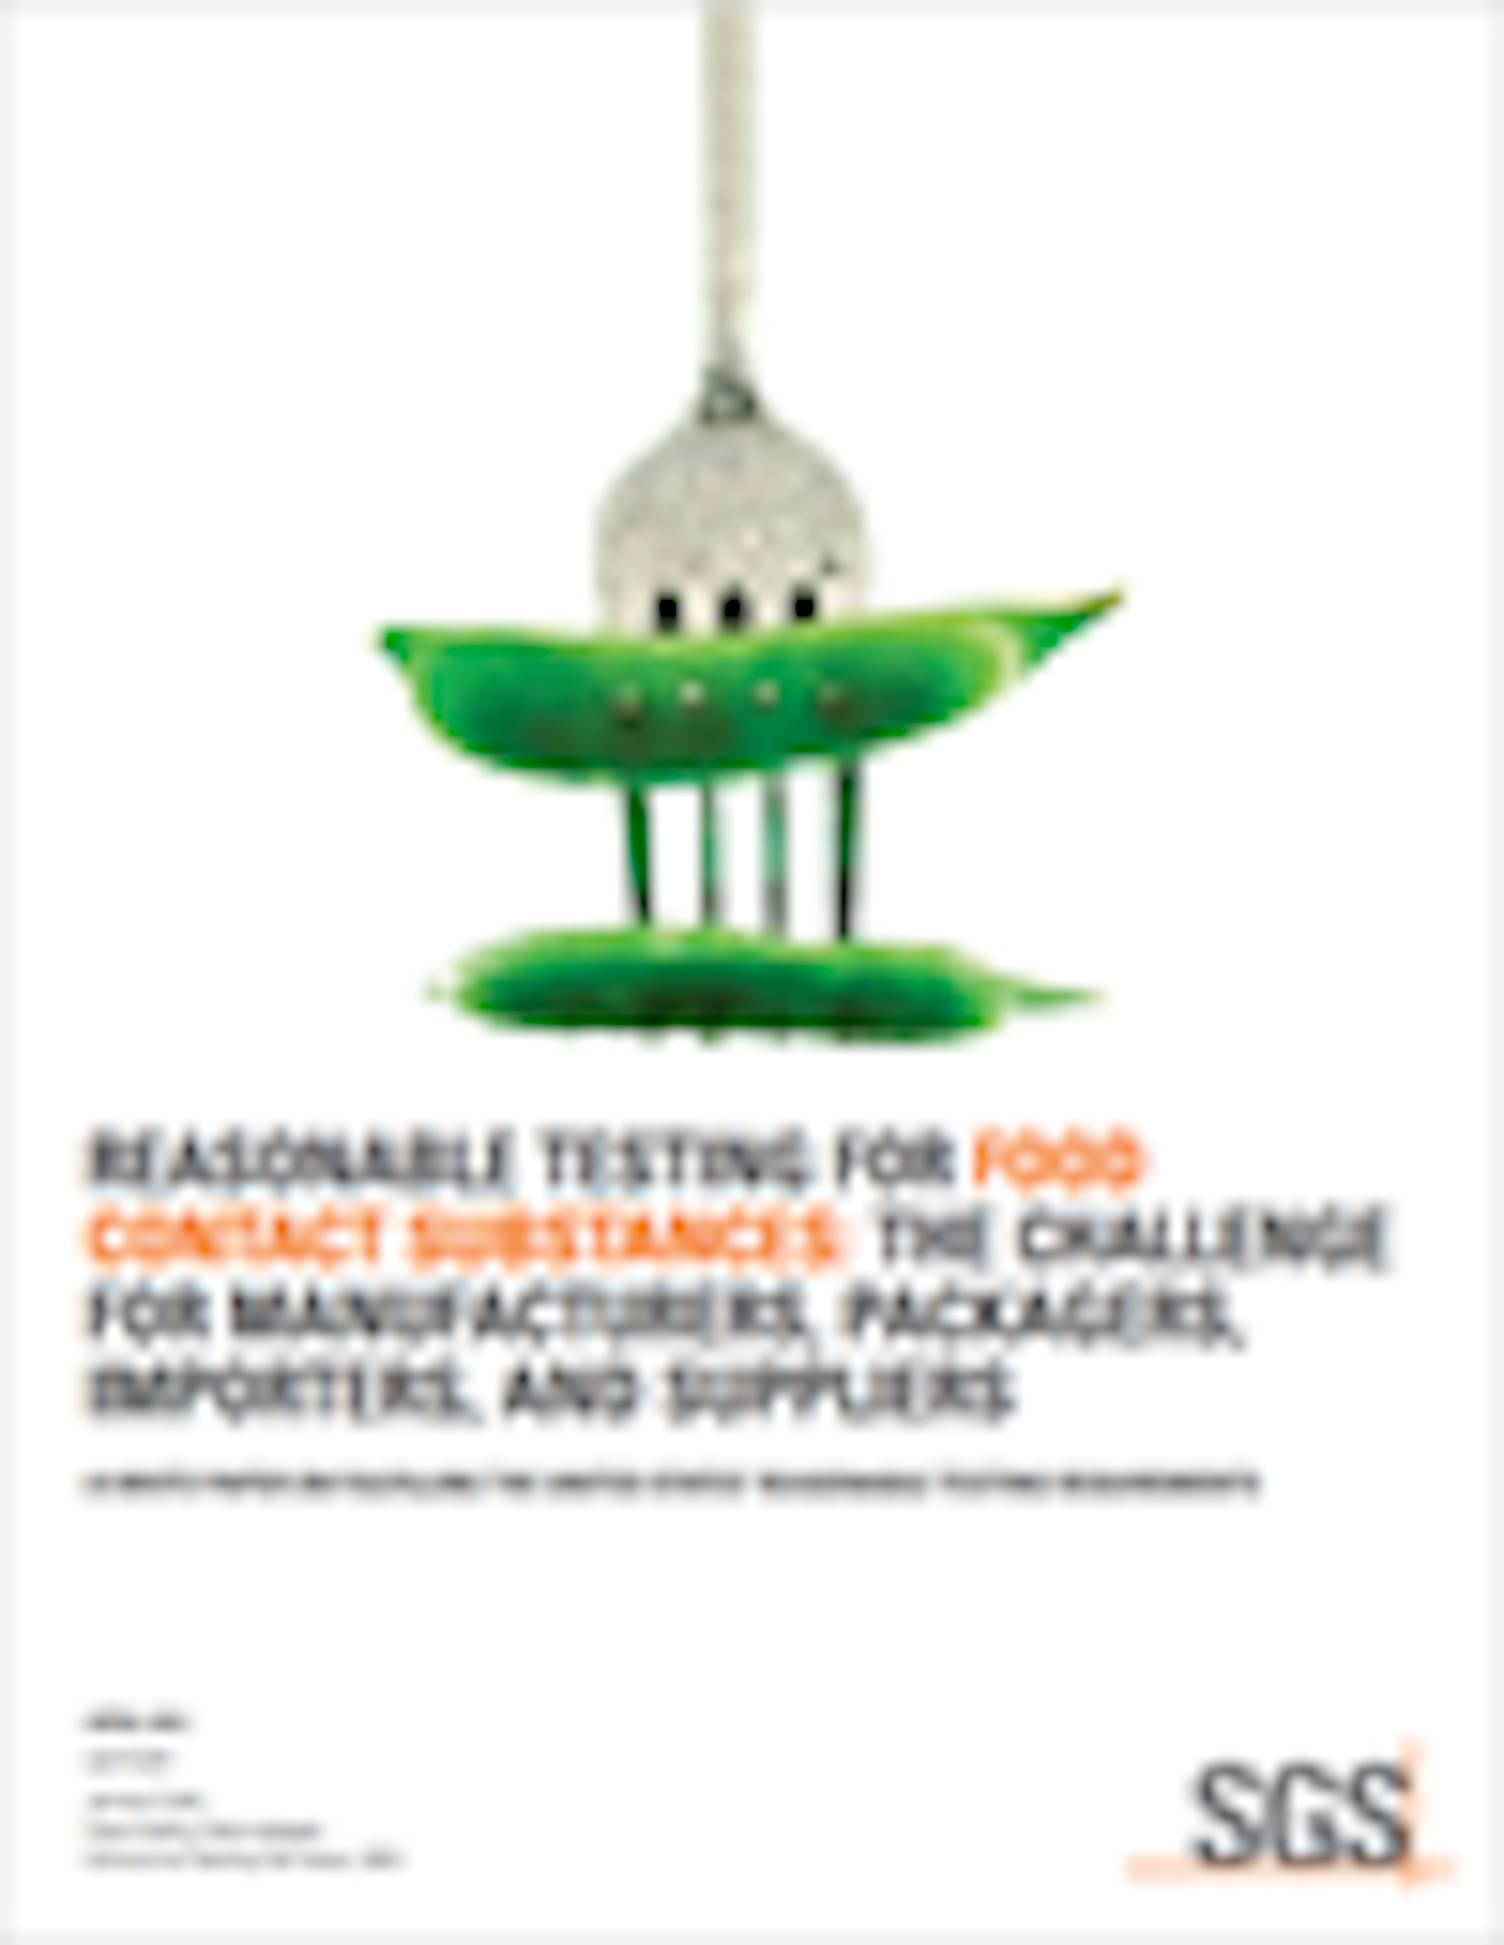 344 x 447 Reasonable Testing for Food Contact Substances